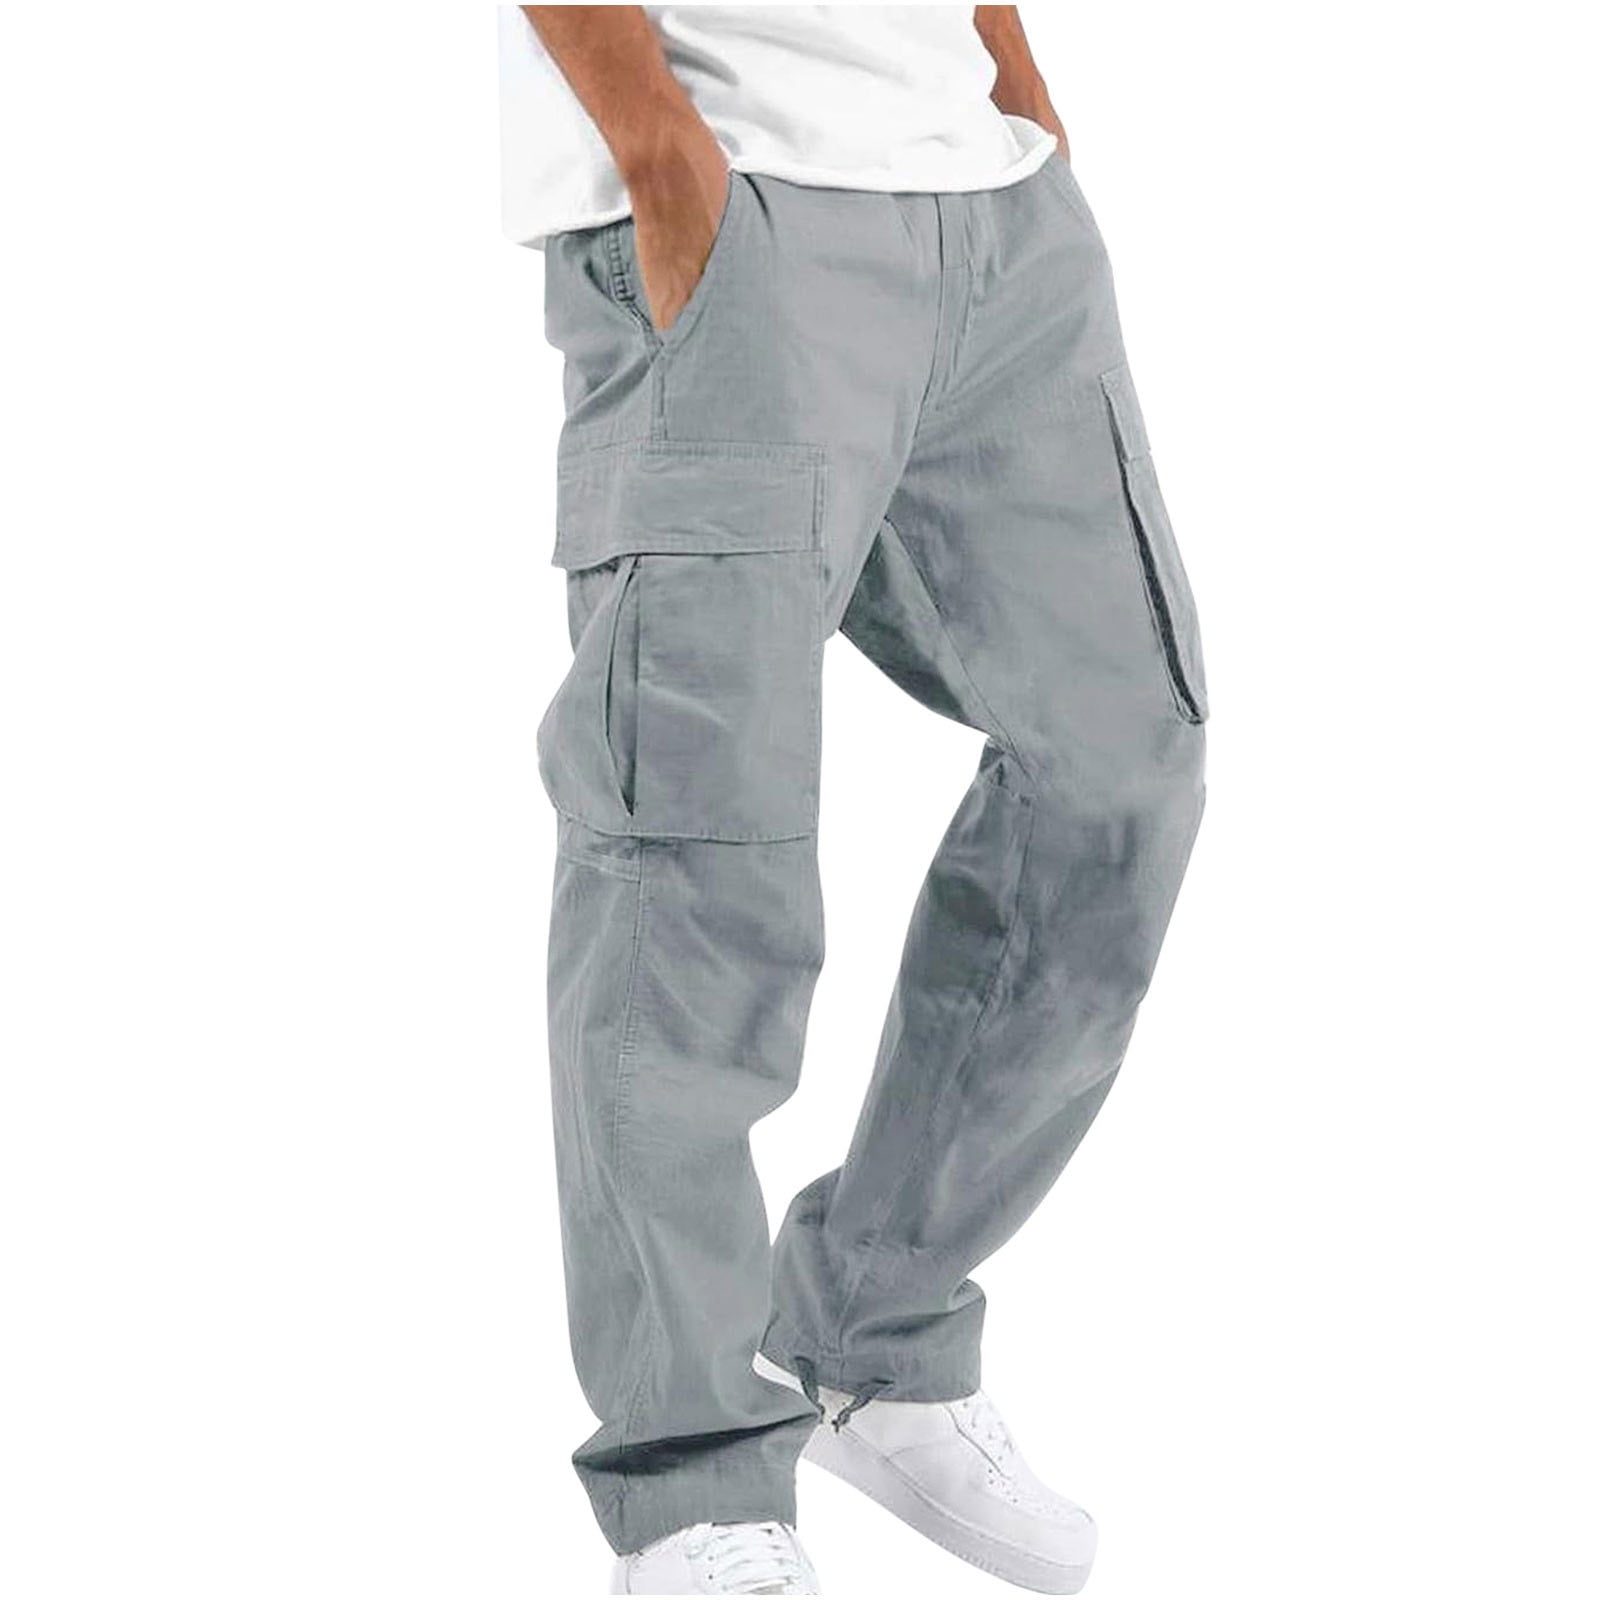 Wide Carpenter Trousers With Fringes - Men - Ready-to-Wear